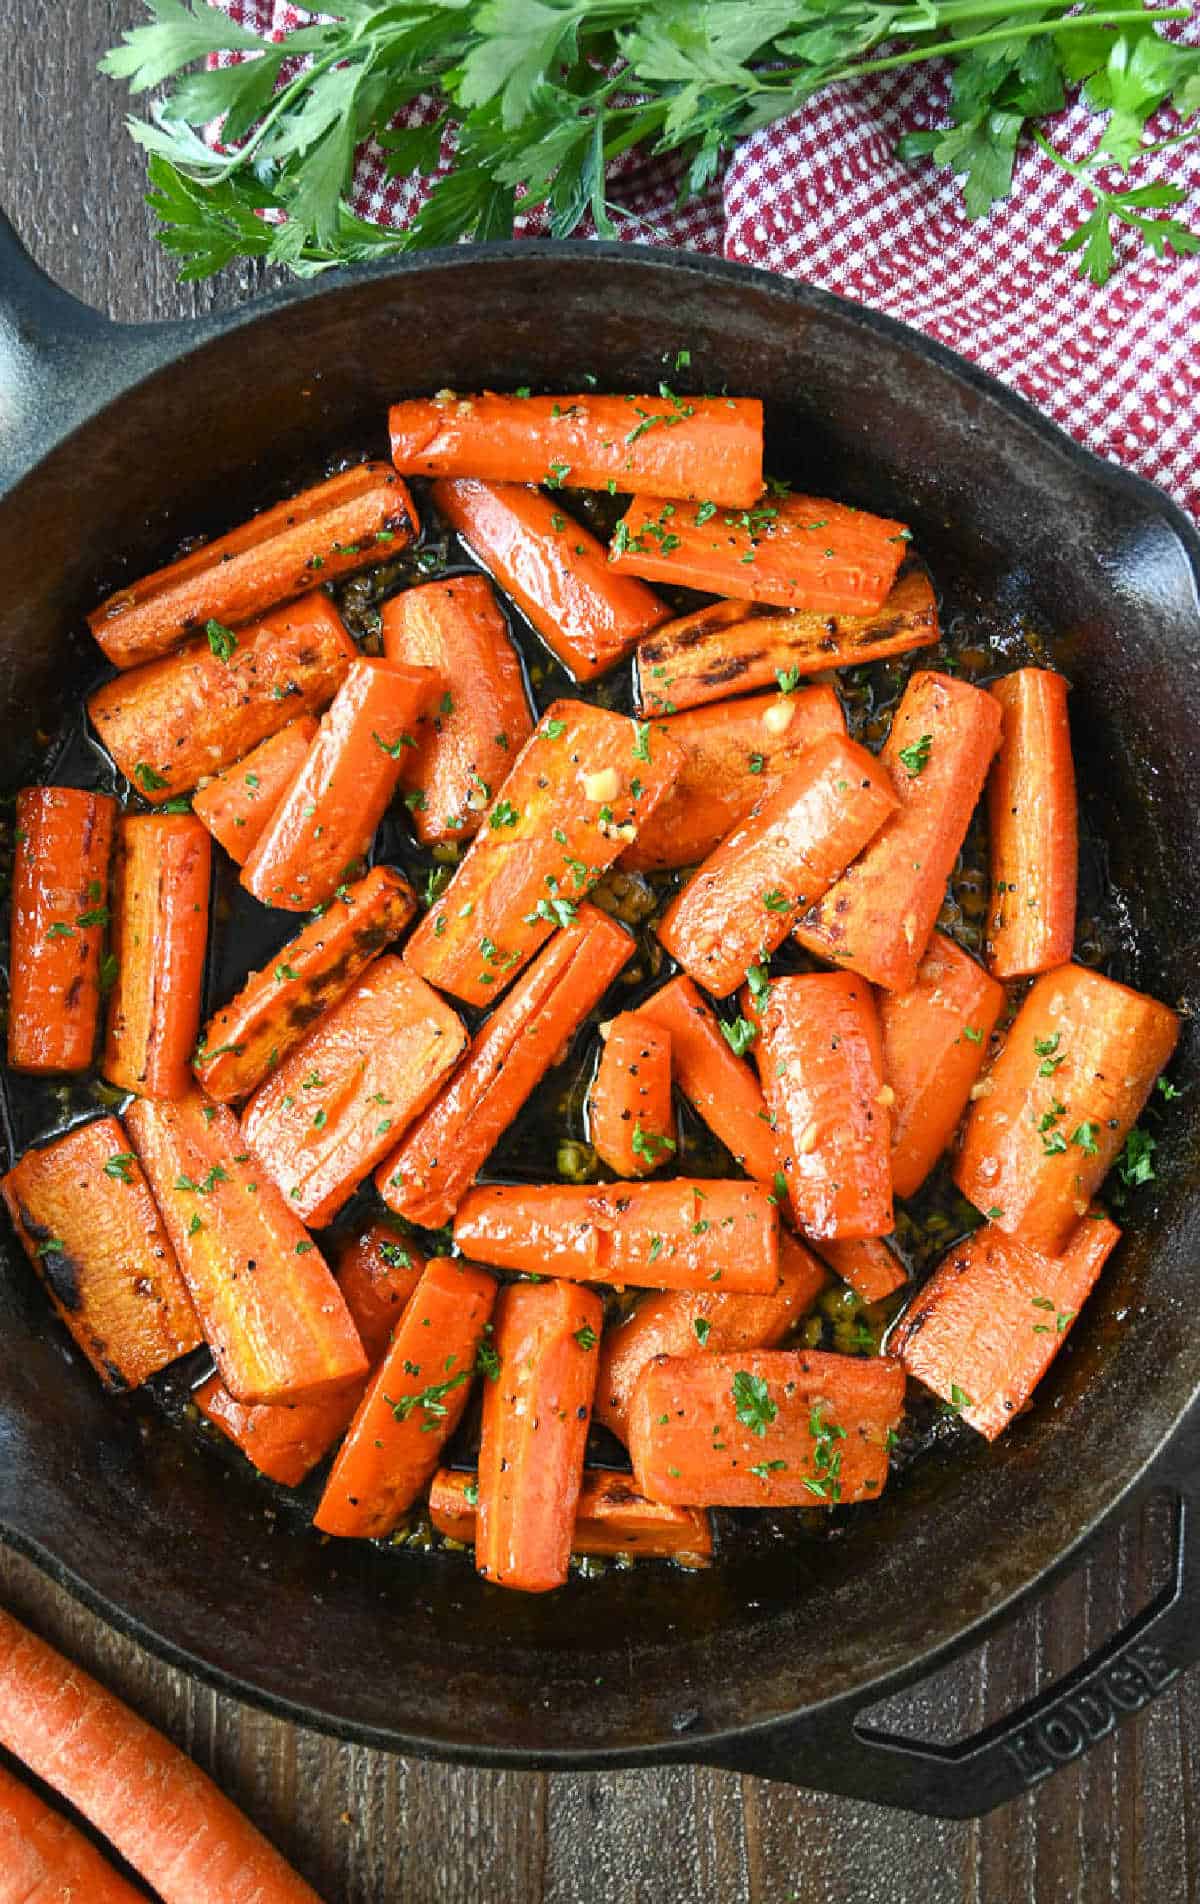 A cast iron skillet with honet roasted carrots.